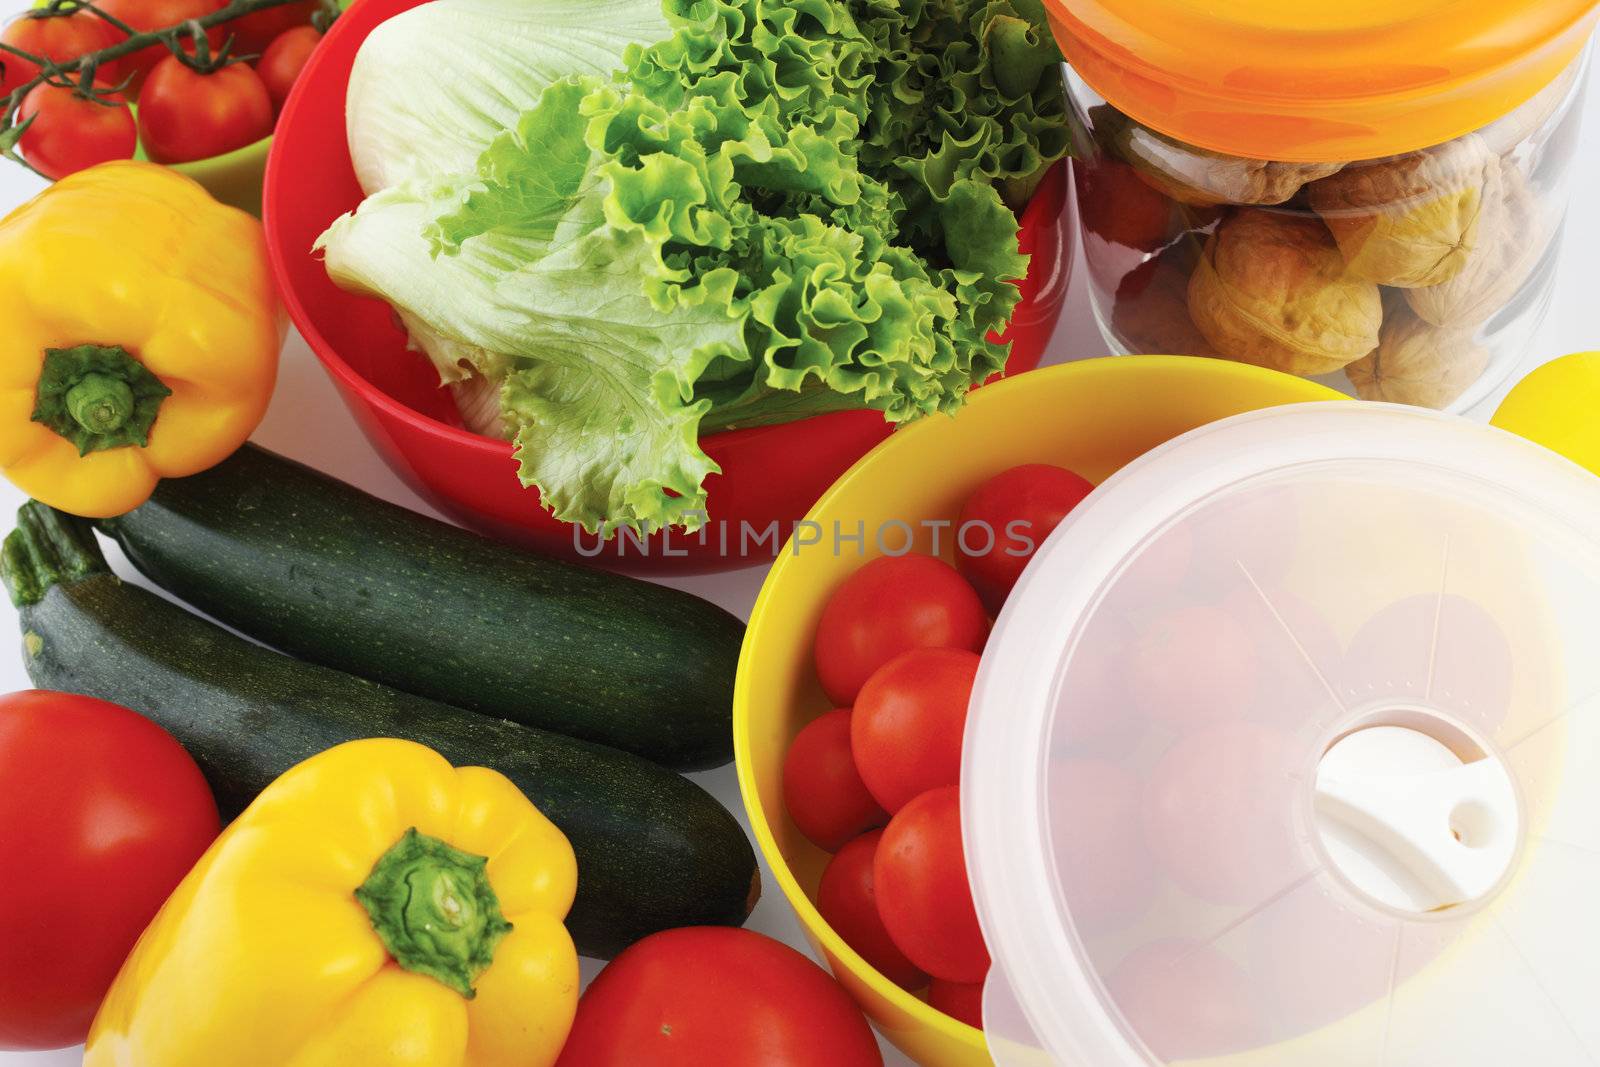 plastic containers for storing food in the fridge by stokkete